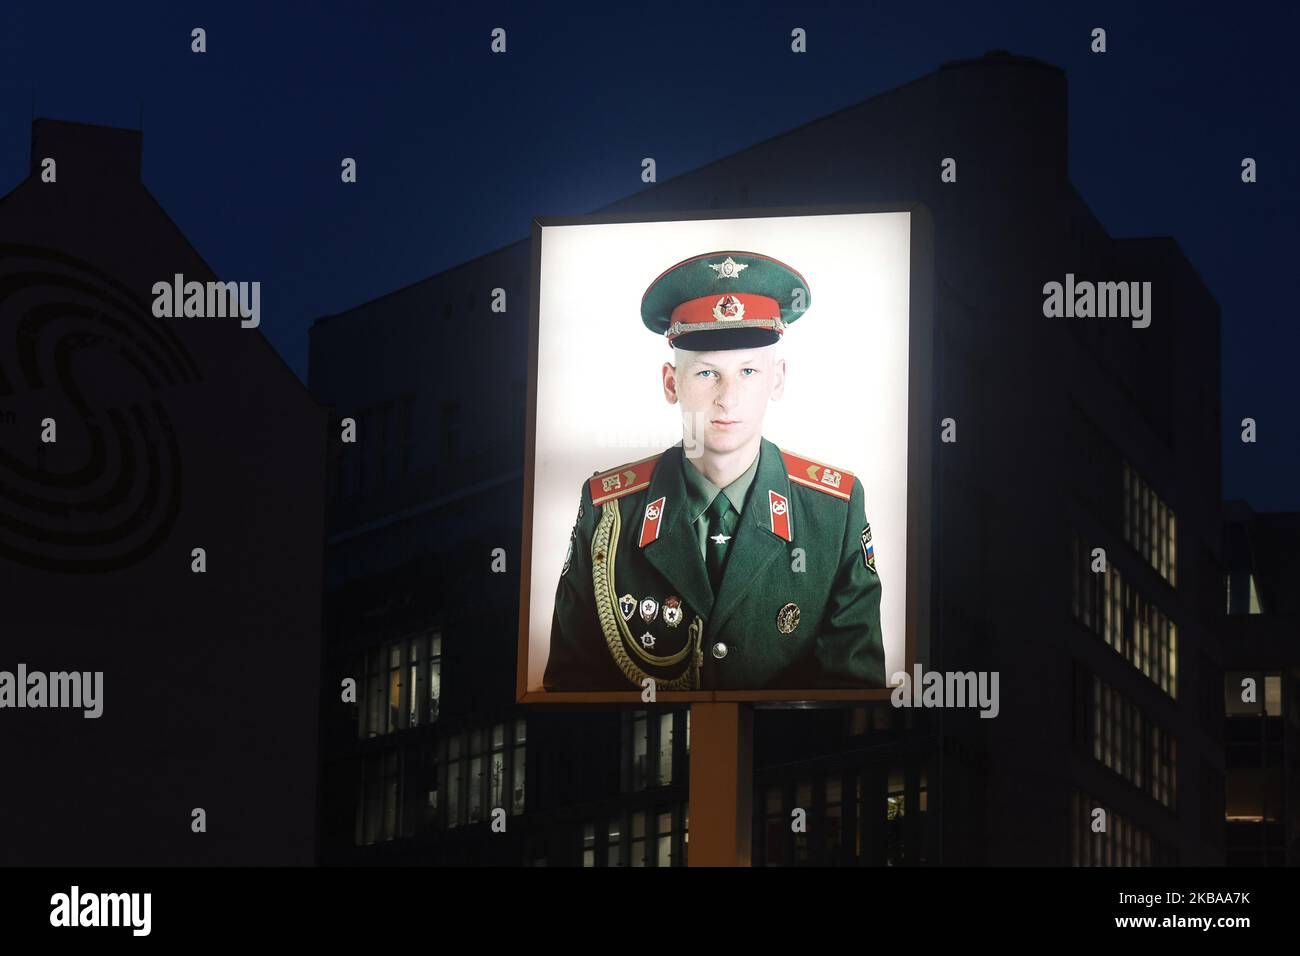 A portrait of a Russian soldier stands illuminated at former Checkpoint Charlie, where U.S. and Soviet tanks confronted each other in the early years of the Cold War, seen just two days ahead of the upcoming 30th anniversary of the fall of the Berlin Wall. The Berlin Wall divided the German capital from 1961 until 1989. Checkpoint Charlie was a main crossing point at the Wall from the American Sector in West Berlin into the Russian sector in East Berlin. On Thursday, November 7, 2019, in Berlin, Germany. (Photo by Artur Widak/NurPhoto) Stock Photo